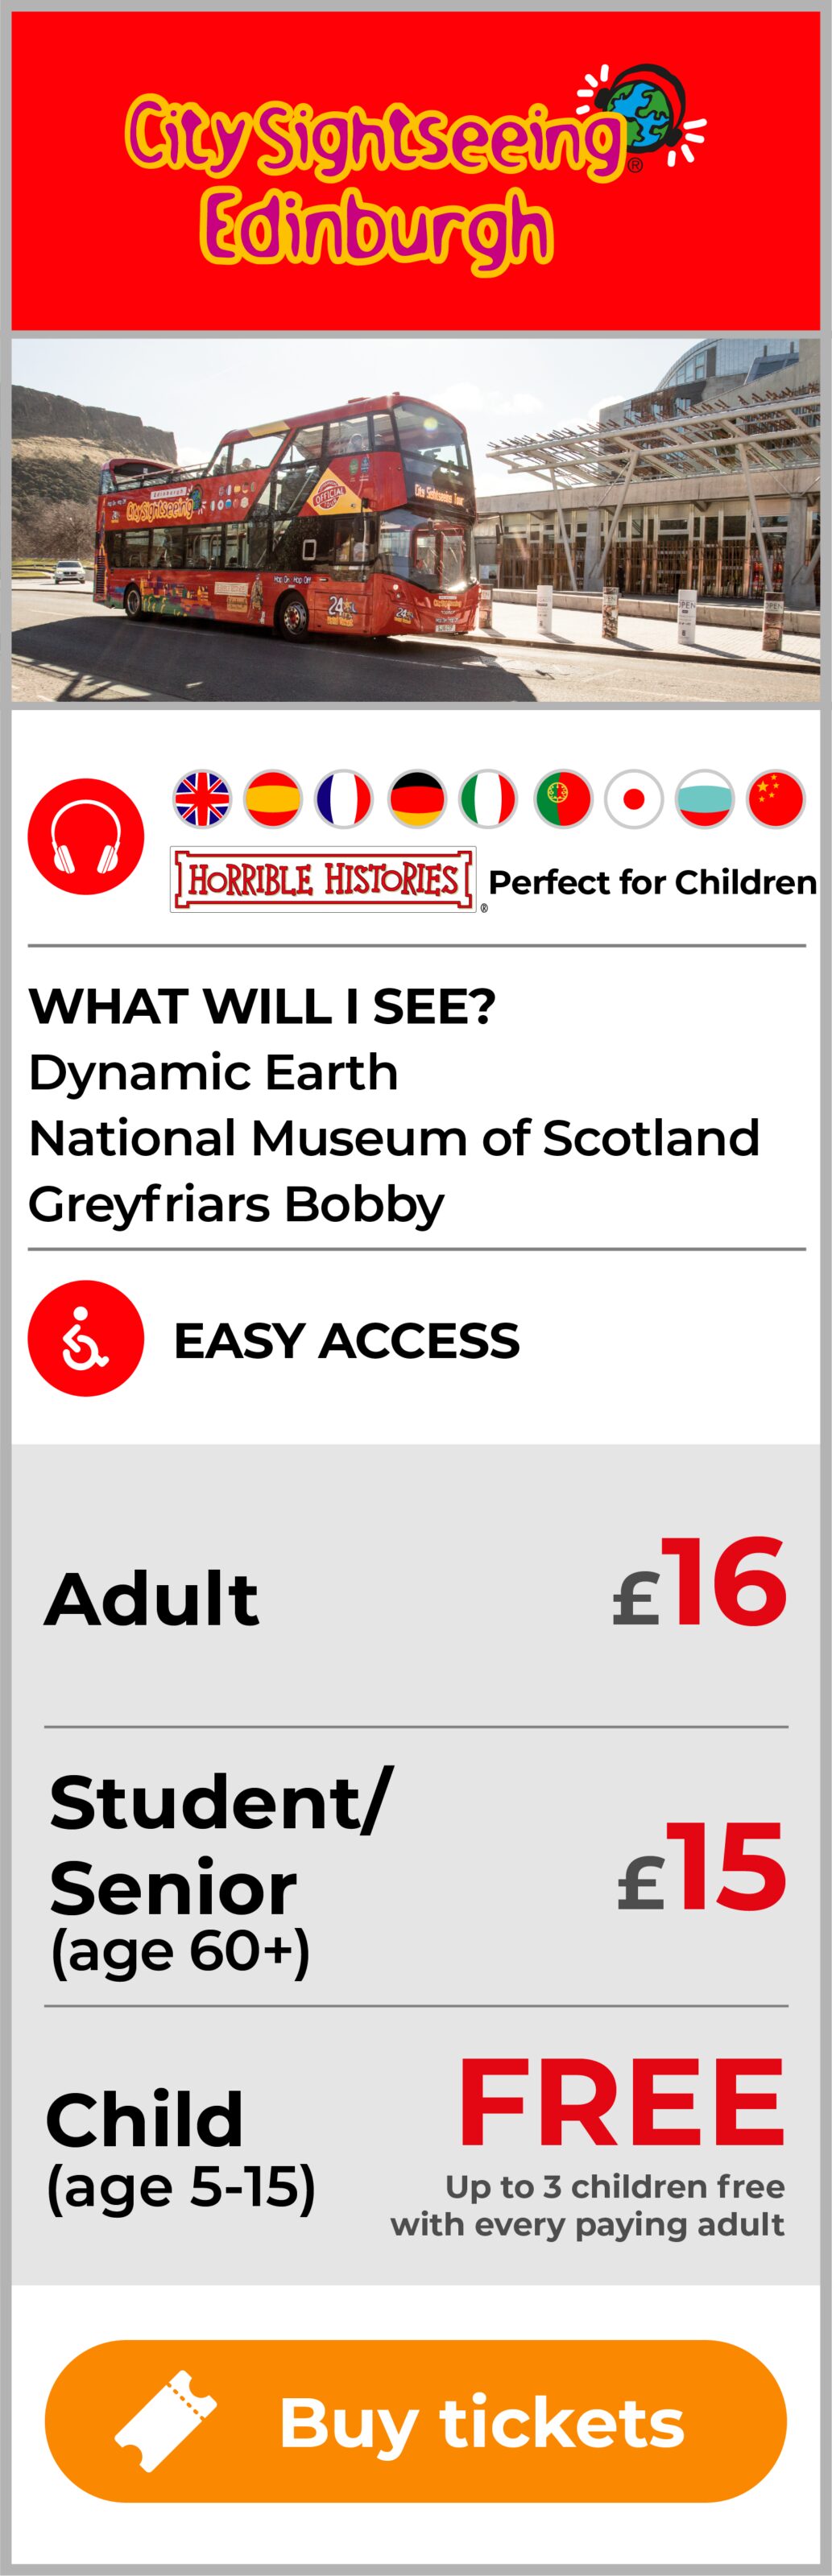 CitySightseeing Tour includes Dynamic Earth National Museum of Scotland Greyfriars Bobby. £16 adult and £15 senior ticket.